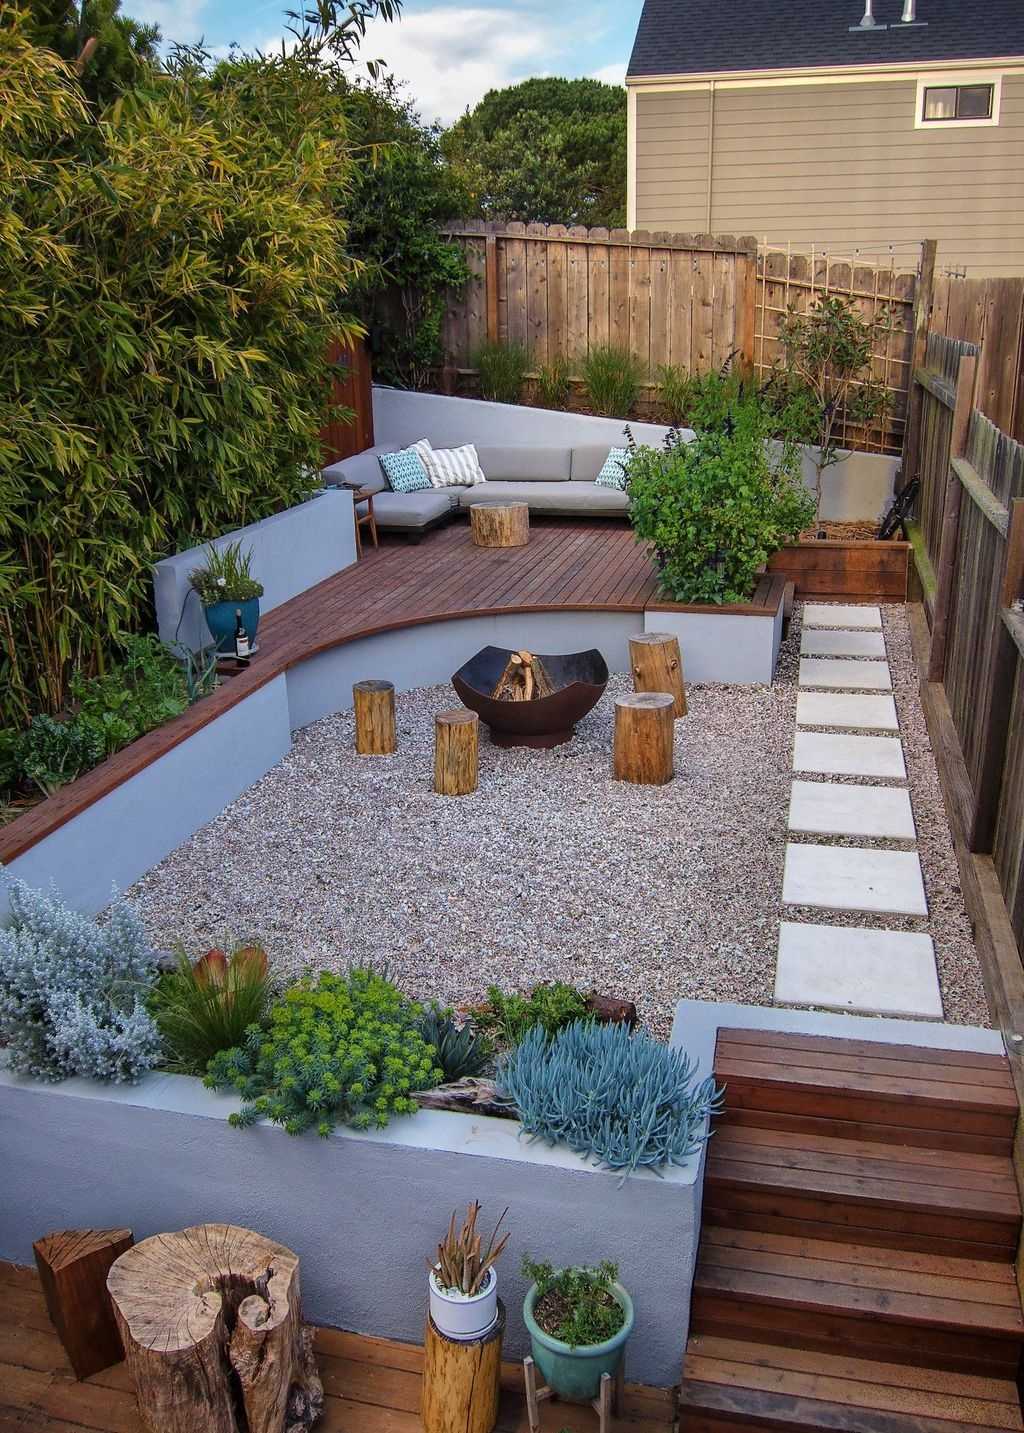  small garden designs pictures